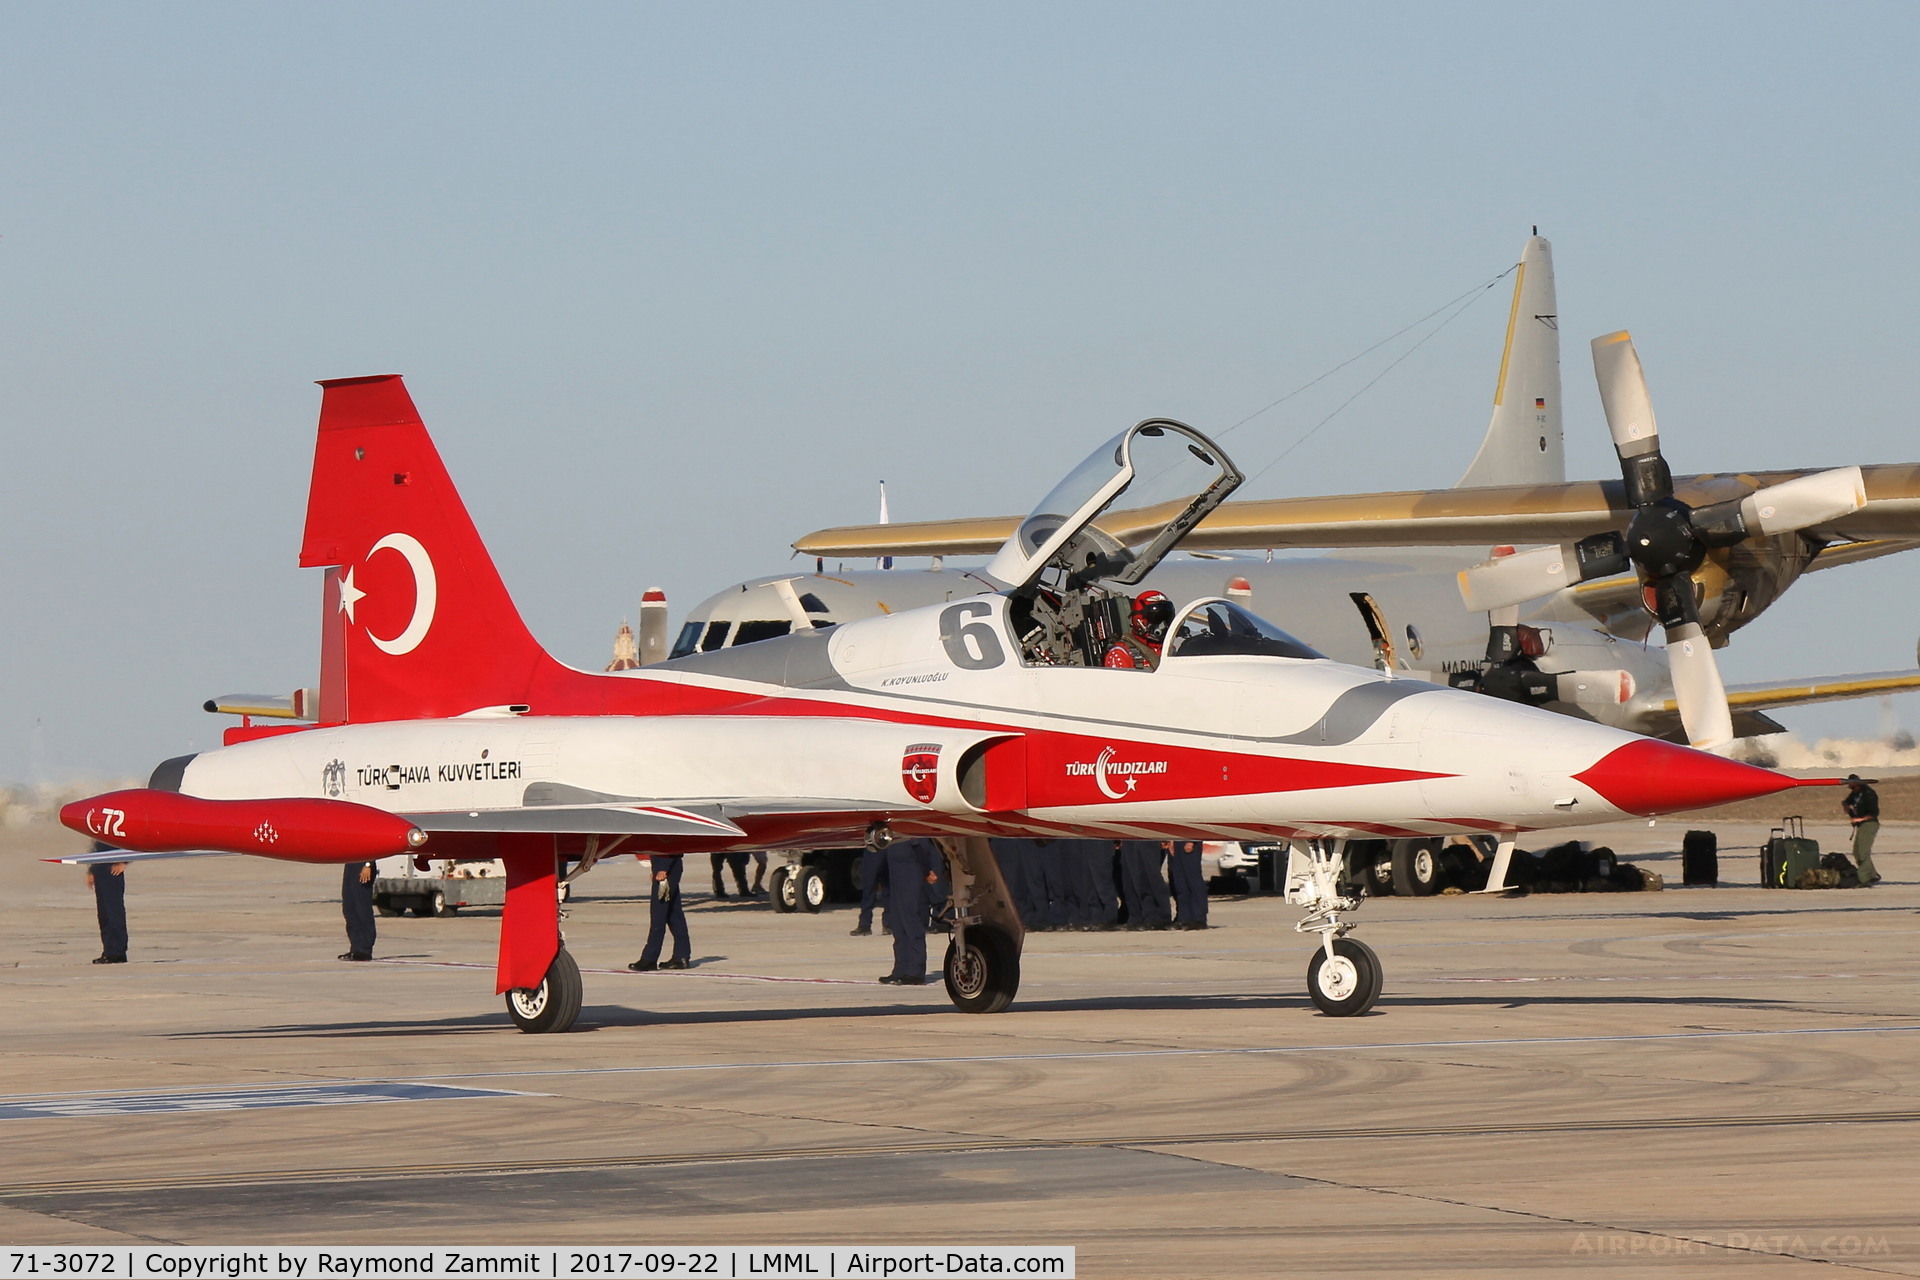 71-3072, Northrop (Canadair) NF-5A-2000 (CL-226) C/N 72, Northrop NF-5B 71-3072/6 Turkish Stars Aerobatic Team taxing out to participate in the Malta International Airshow 2017